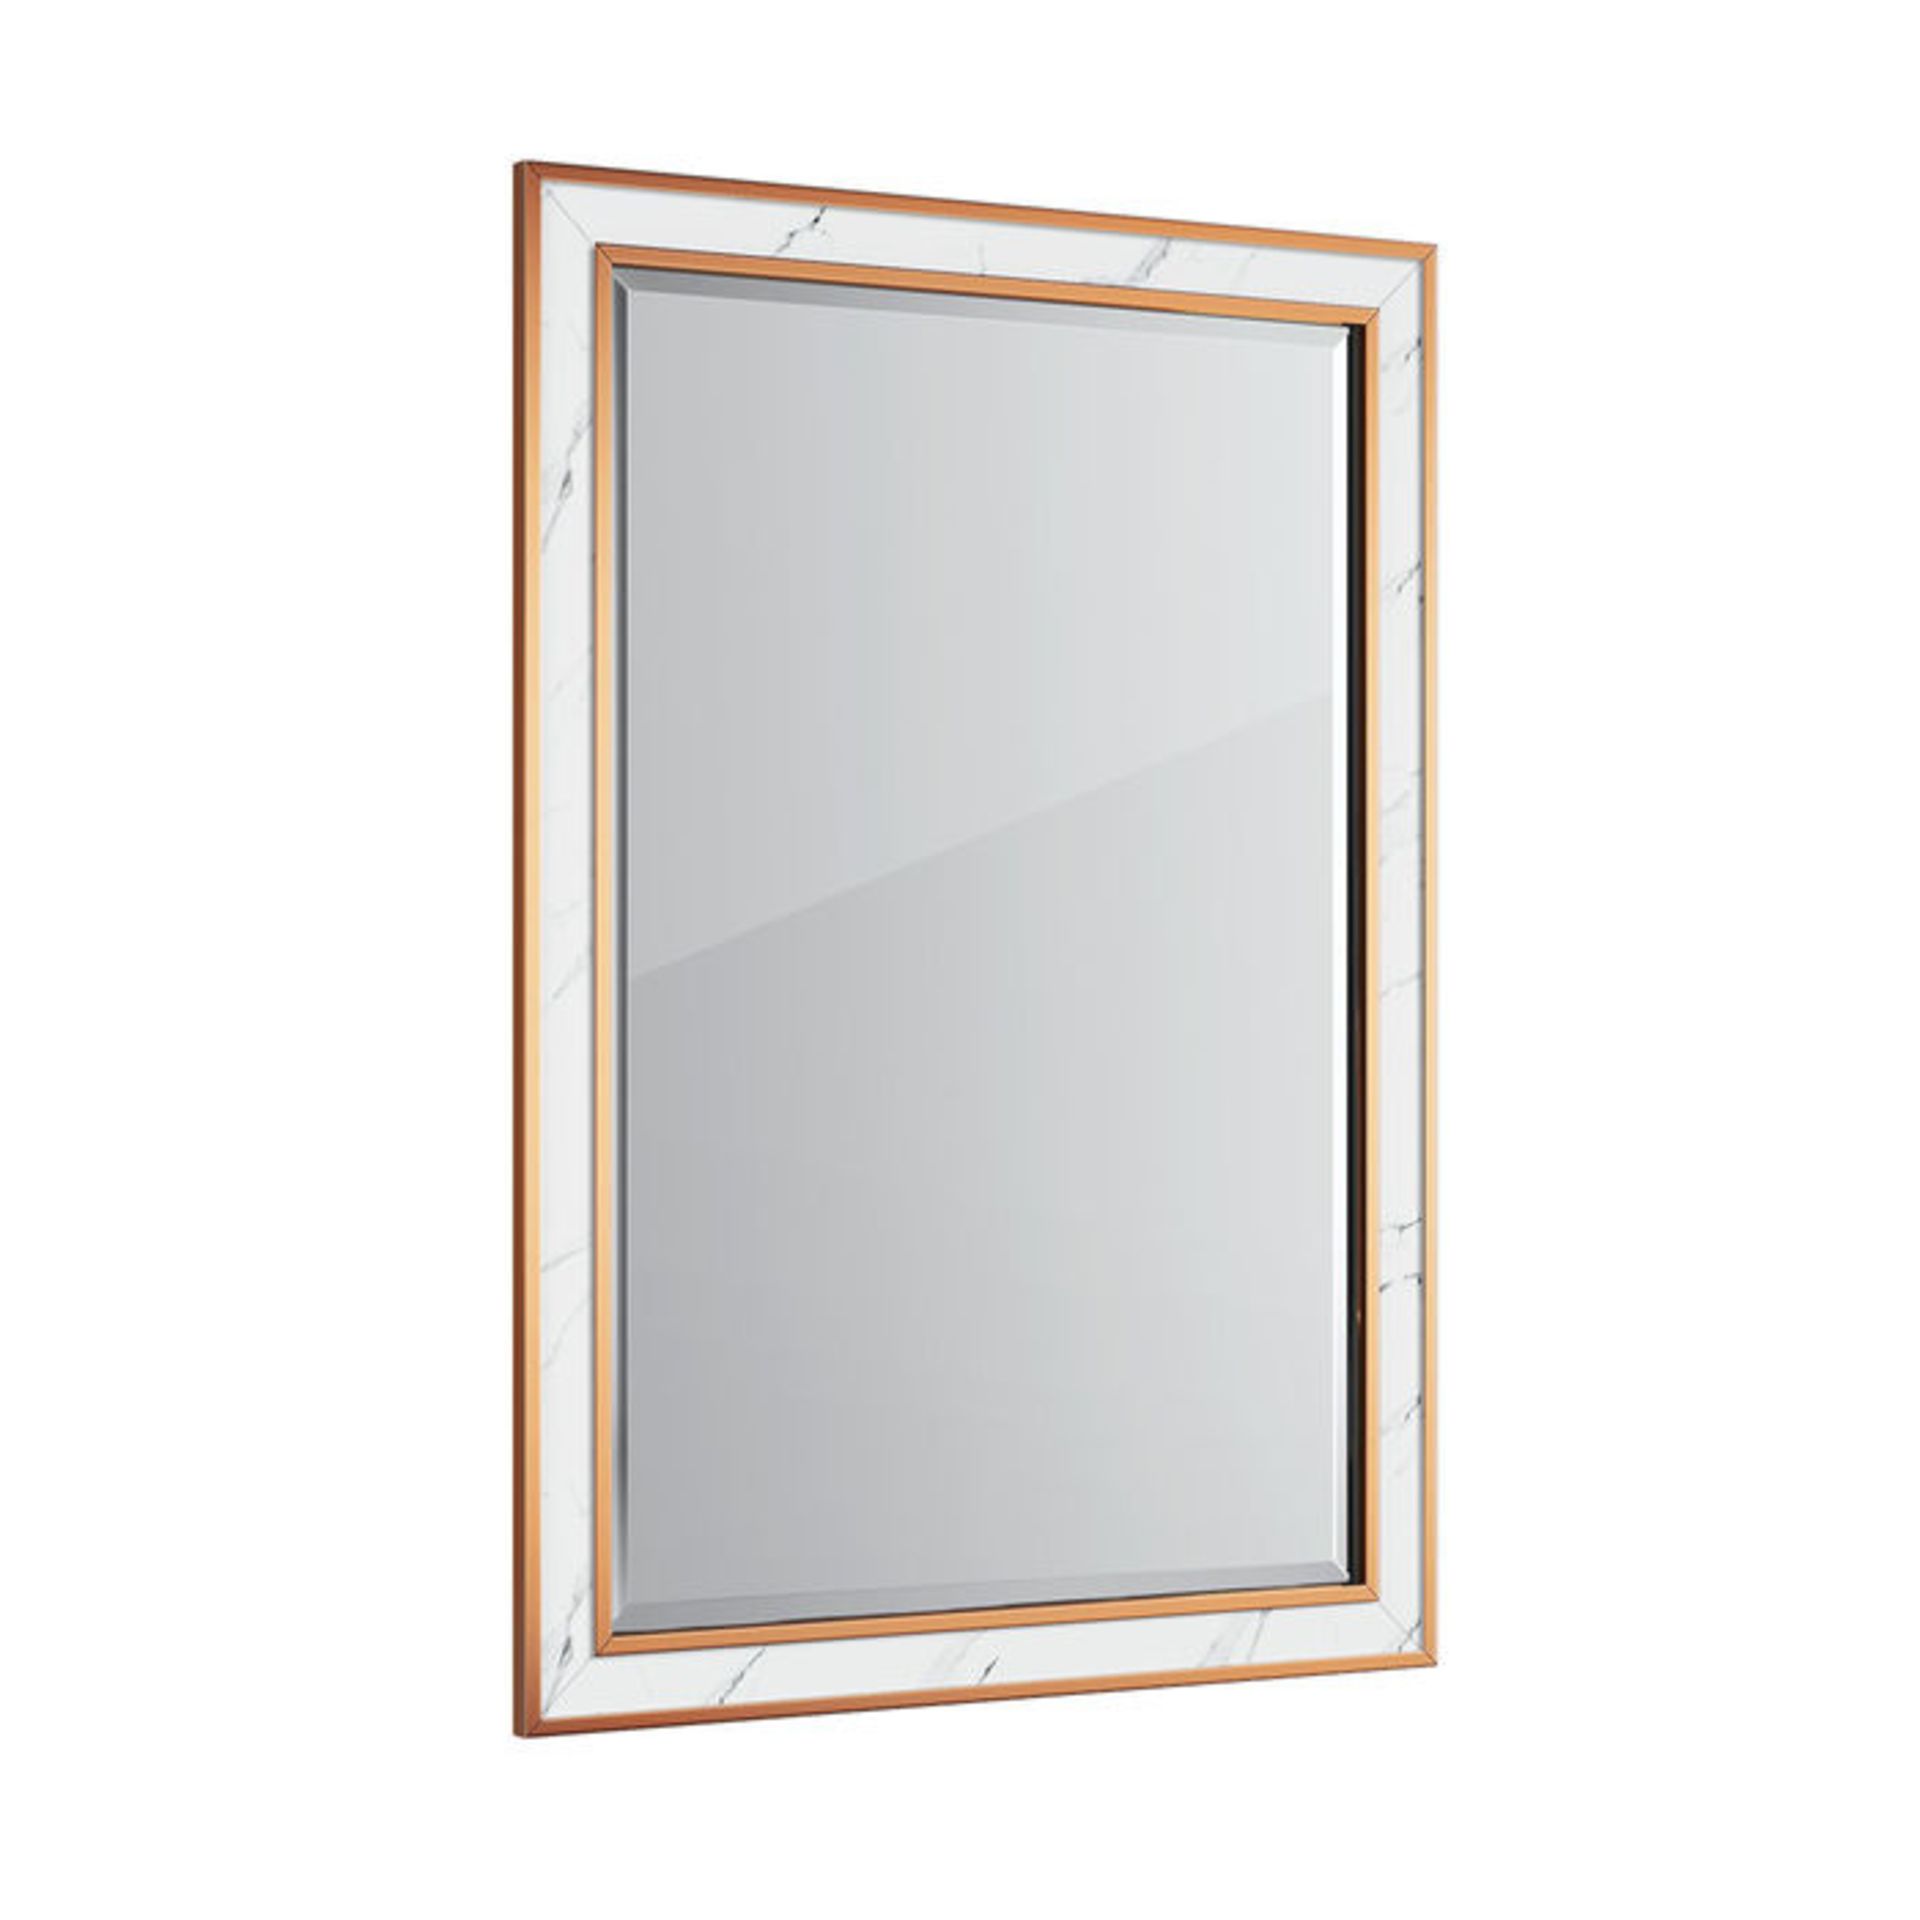 (PT107) 700x1000mm Marble Copper Framed Mirror. RRP £69.99. Manufactured from eco friendly - Image 5 of 5